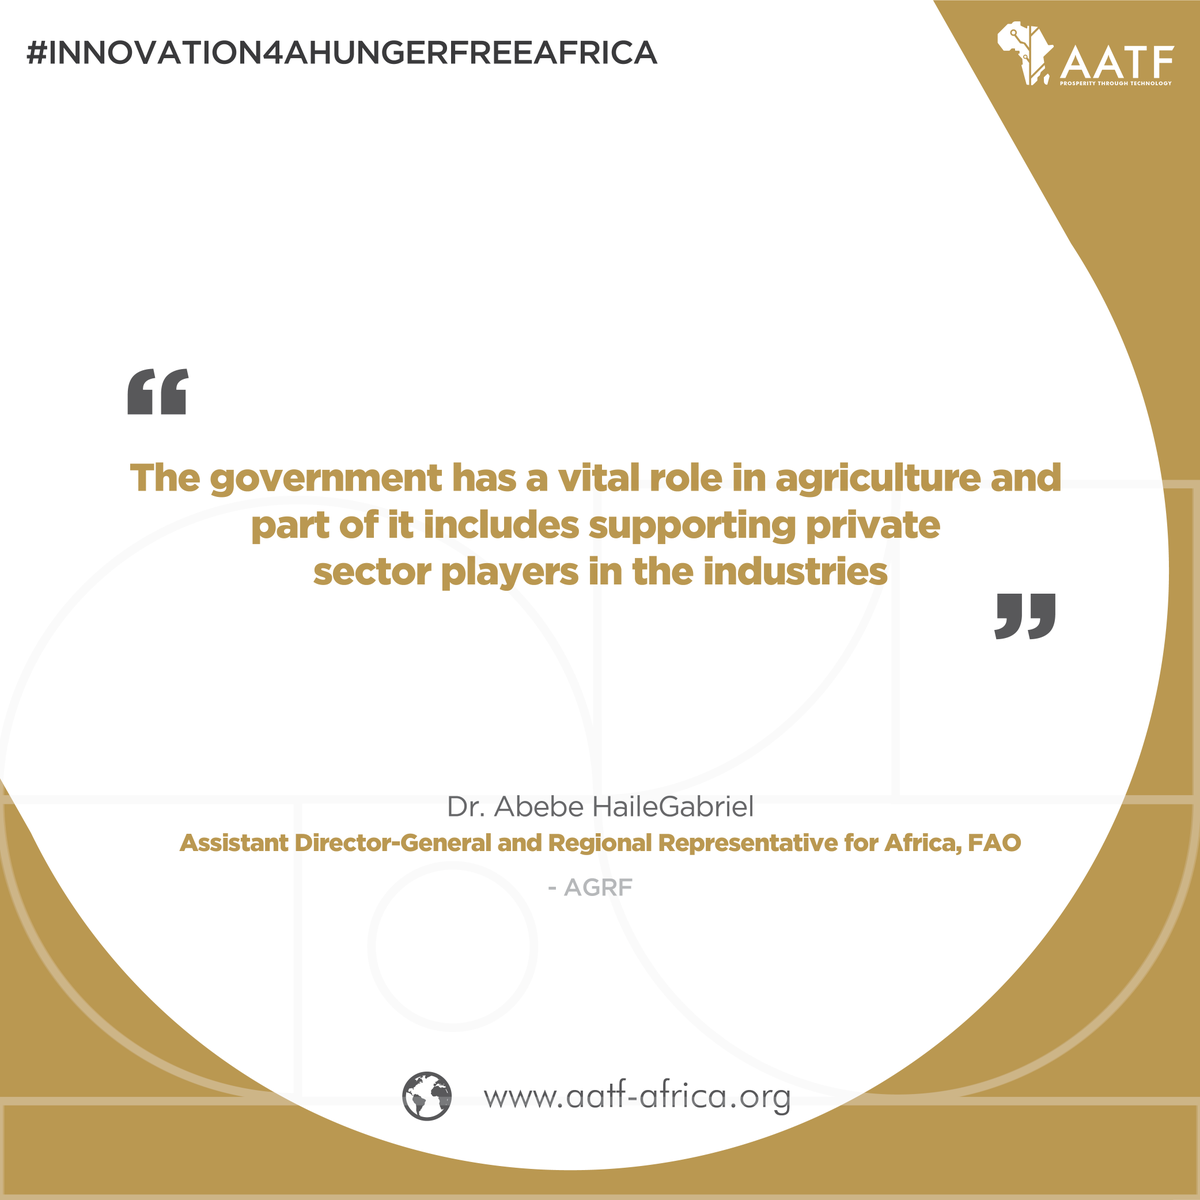 The government has a vital role in agriculture #innovation4ahungerfreeafrica #AATF #Prosperitythroughtechnology #Africa #AGRF2019 #AGRF #Agritech #AgriBusiness #Agriculture #Technology #GrowDigital @TheAGRF @FAOAfrica